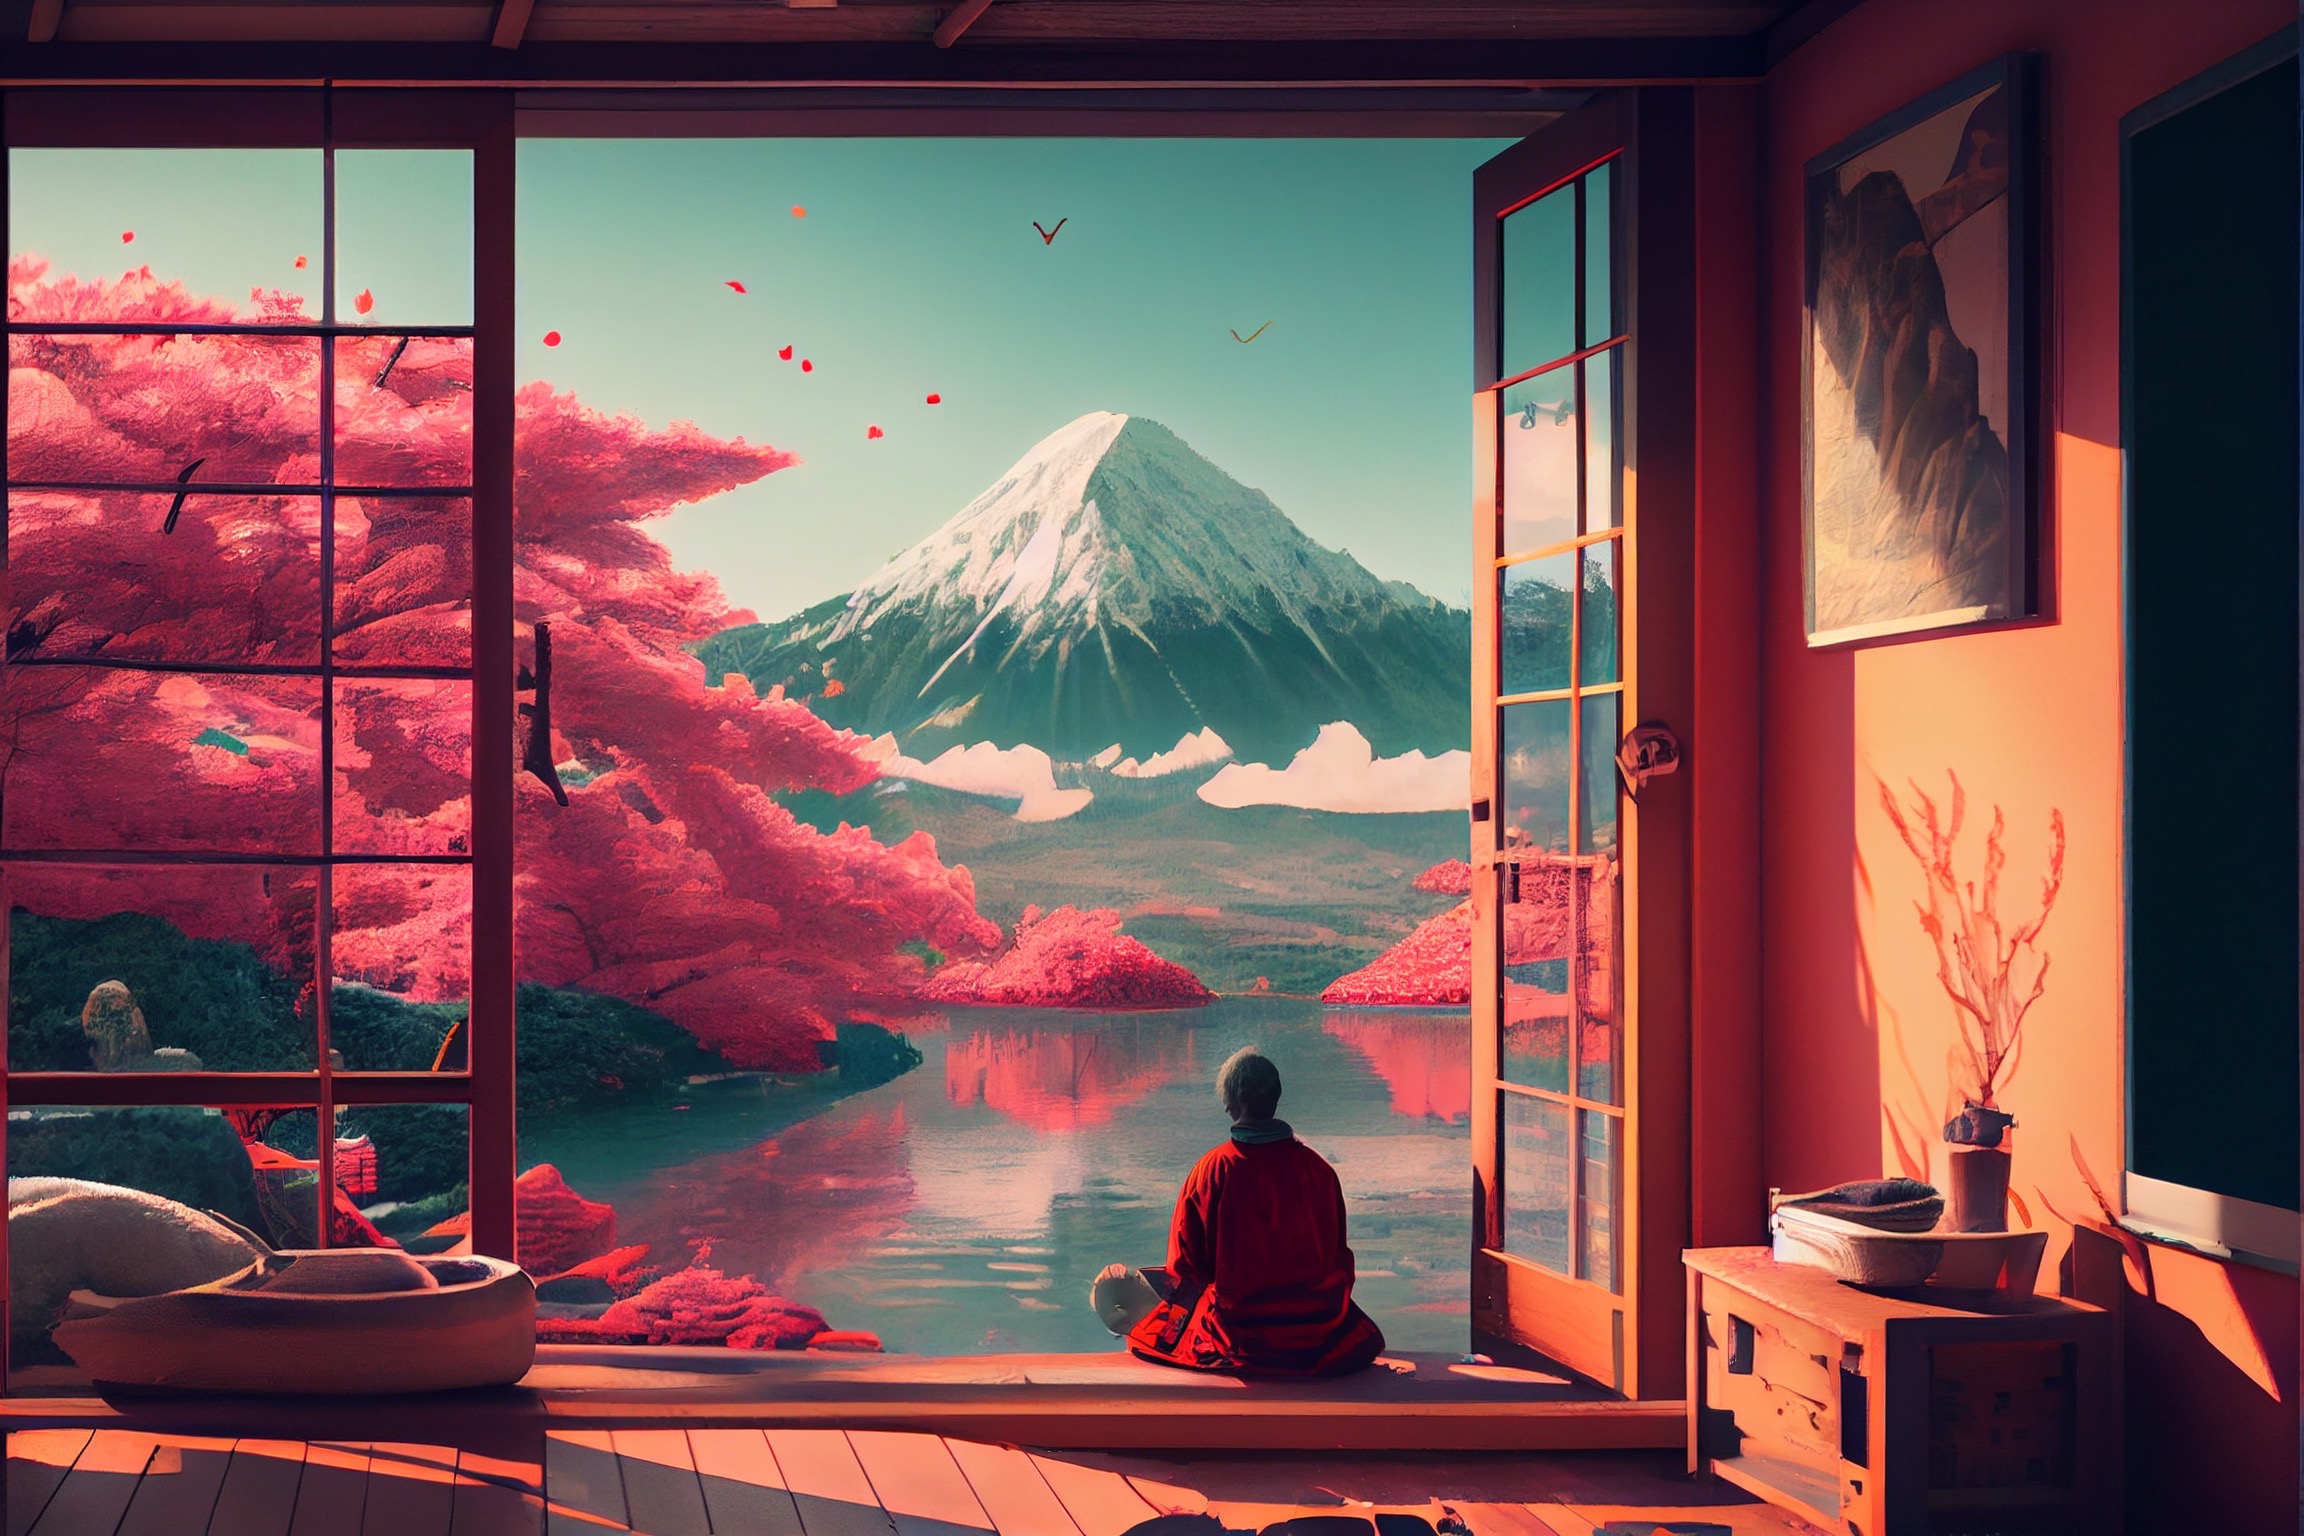 Relax in Japan by aipunk on DeviantArt